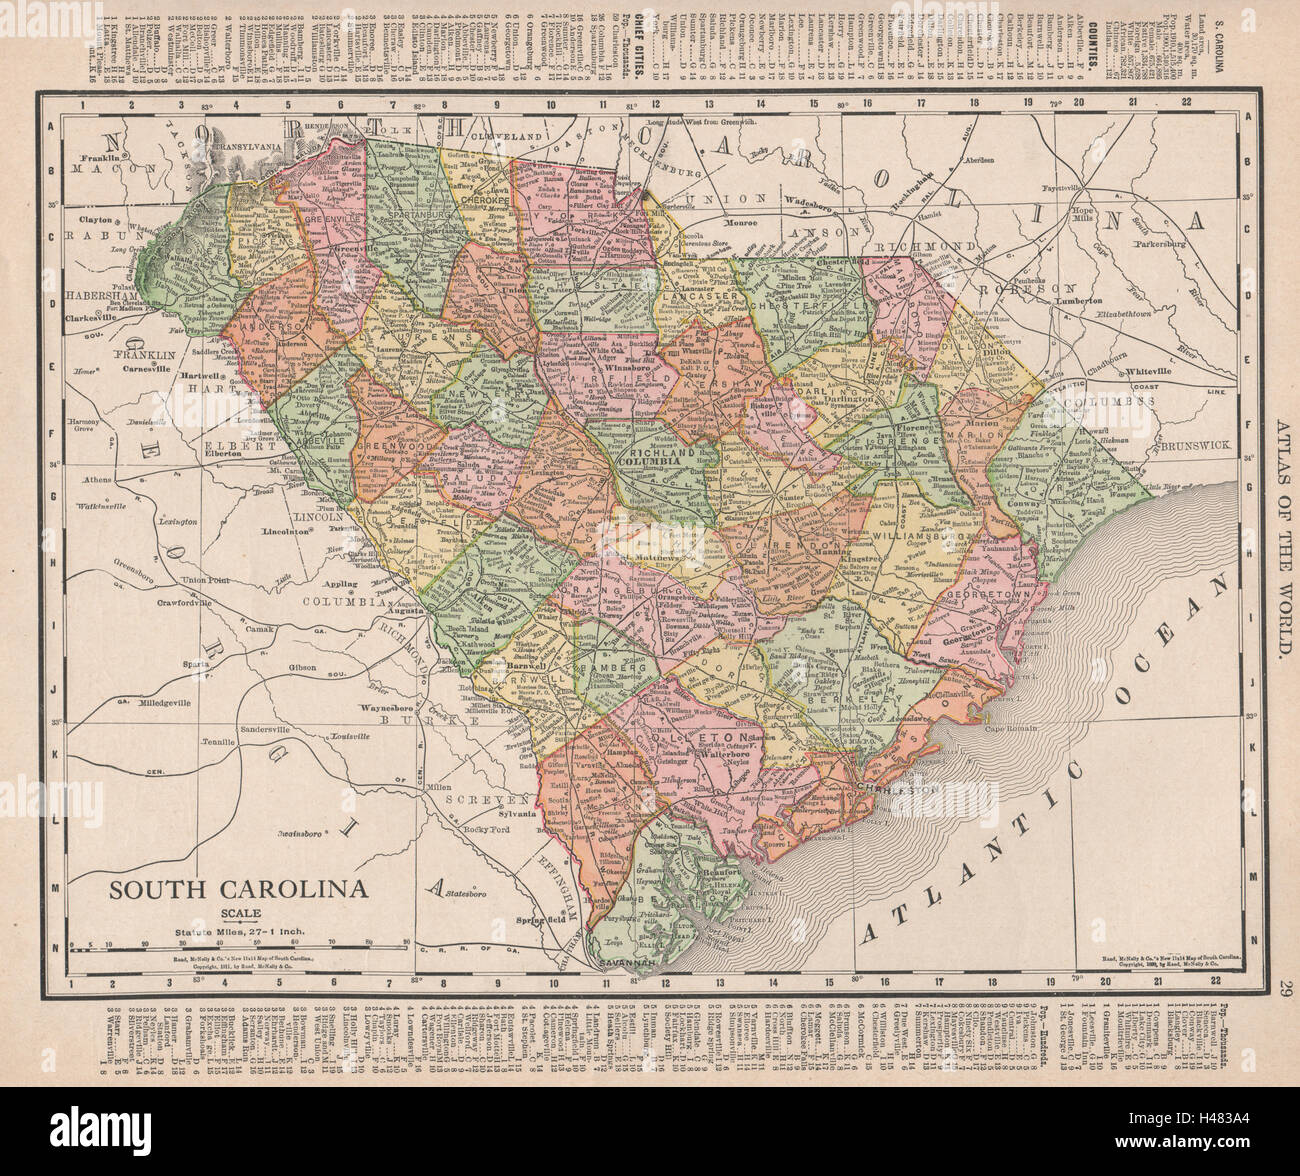 South Carolina state map showing counties. RAND MCNALLY 1912 old antique Stock Photo